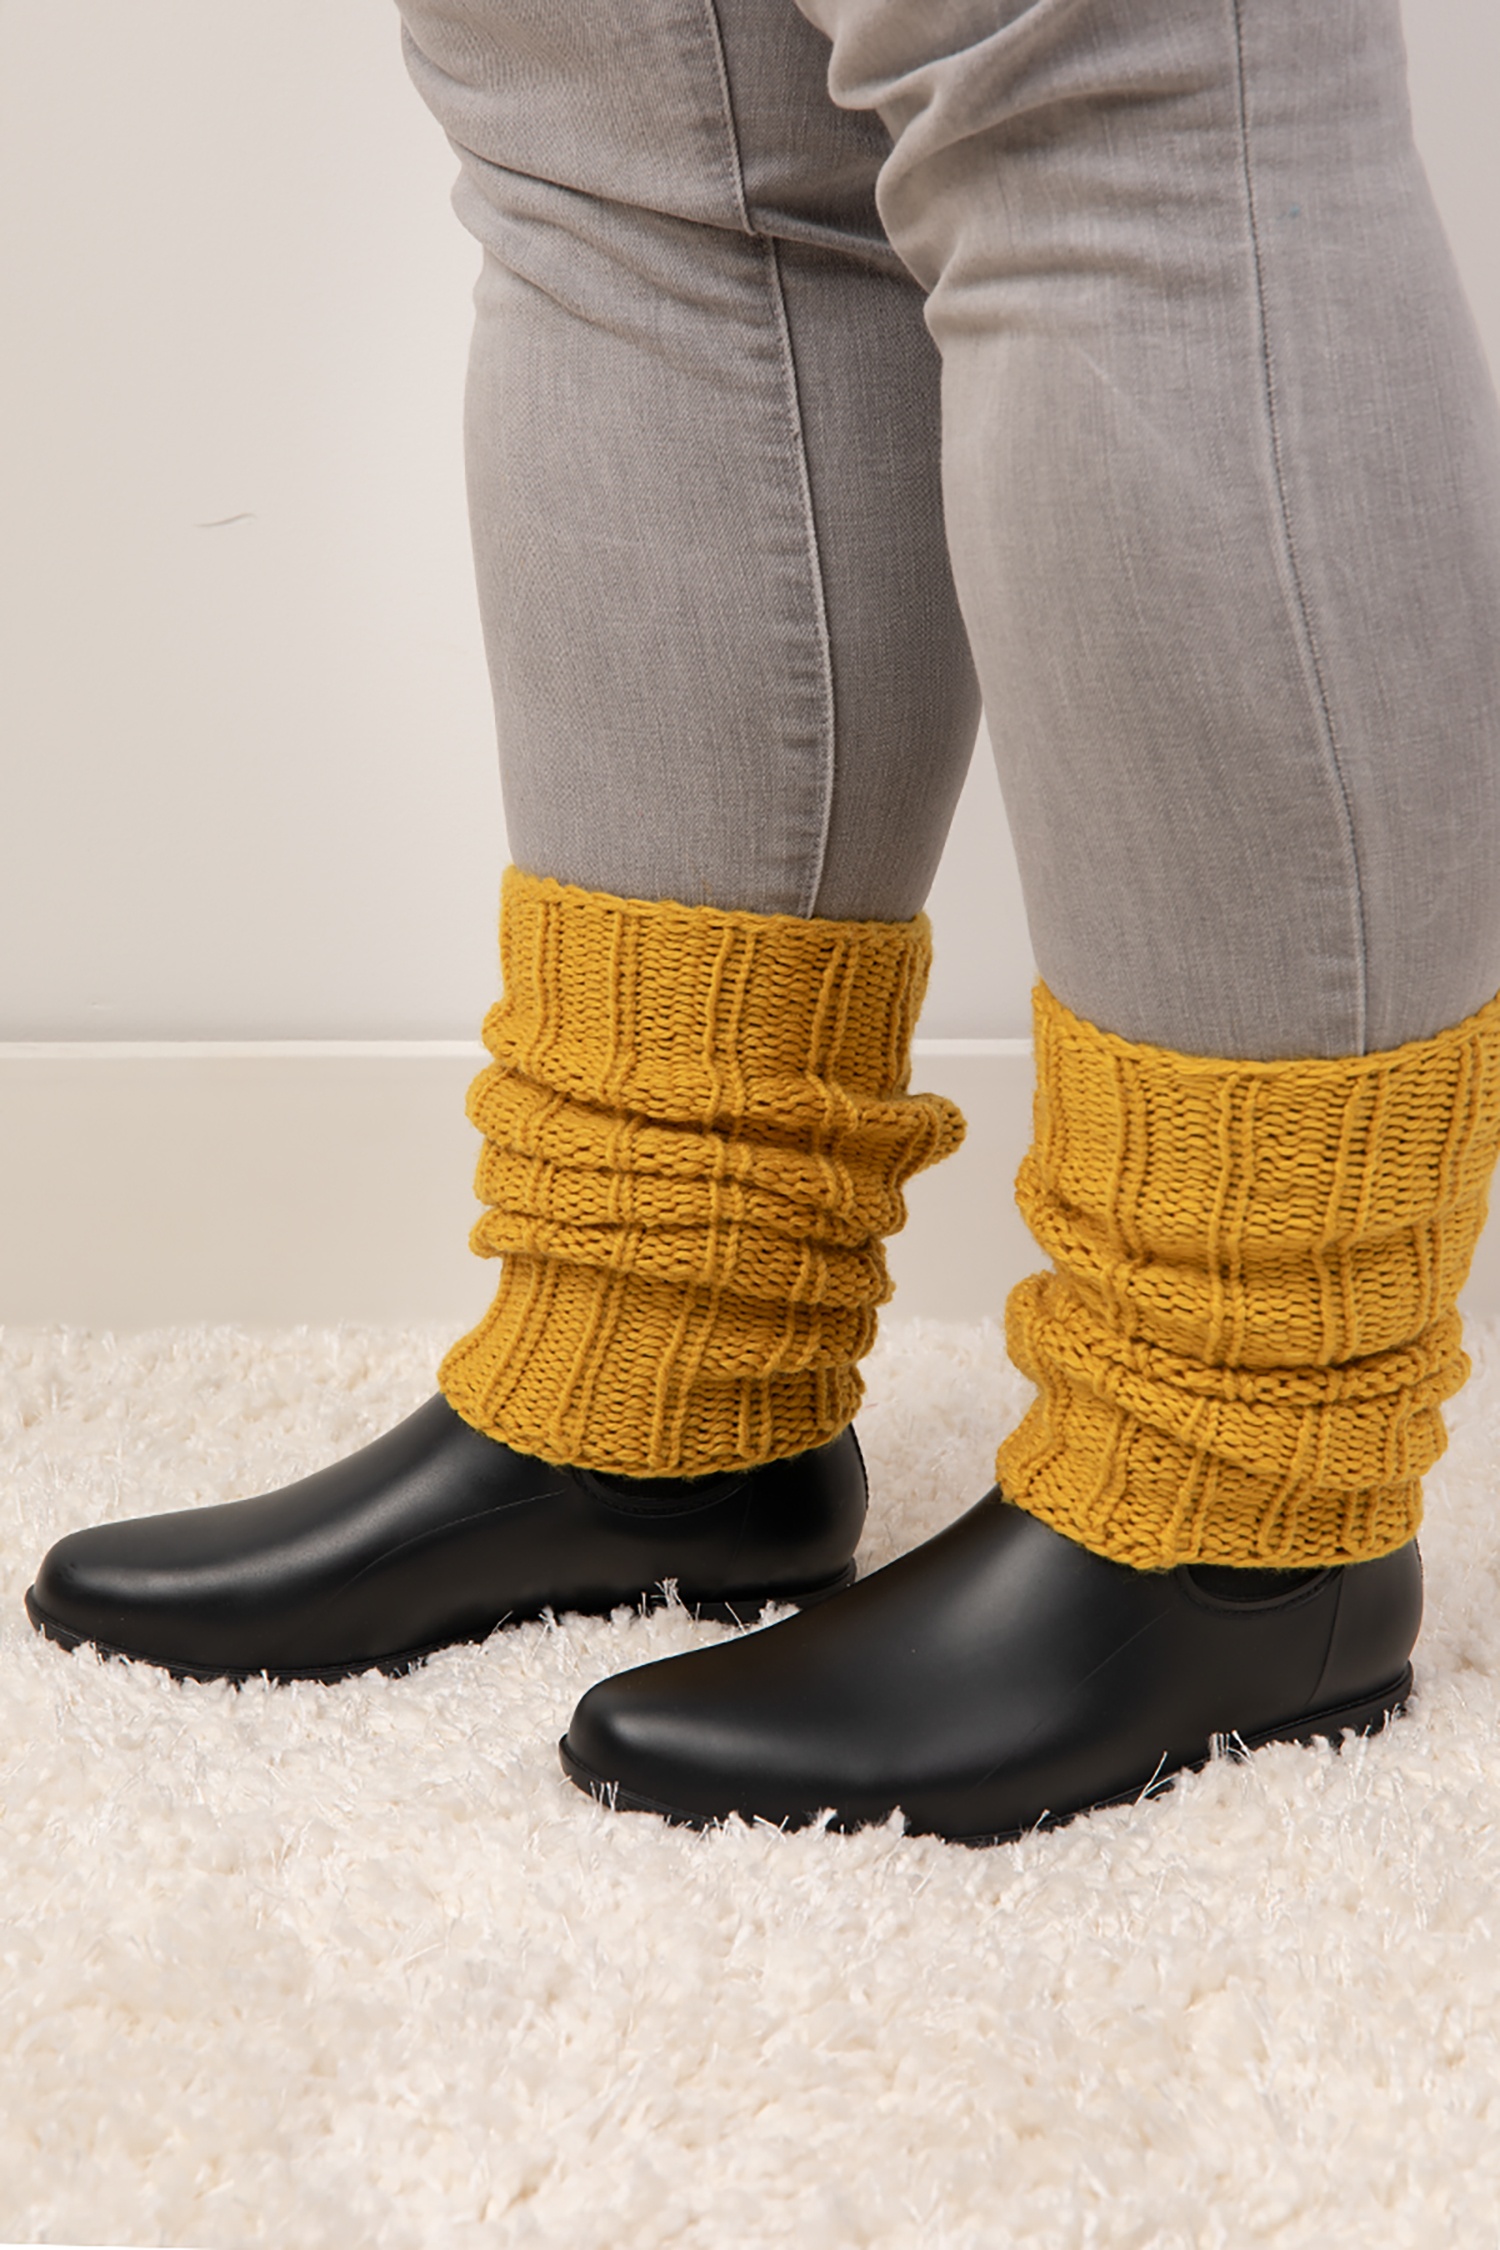 Ministry of Colour Chunky Wool Knit Leg Warmers